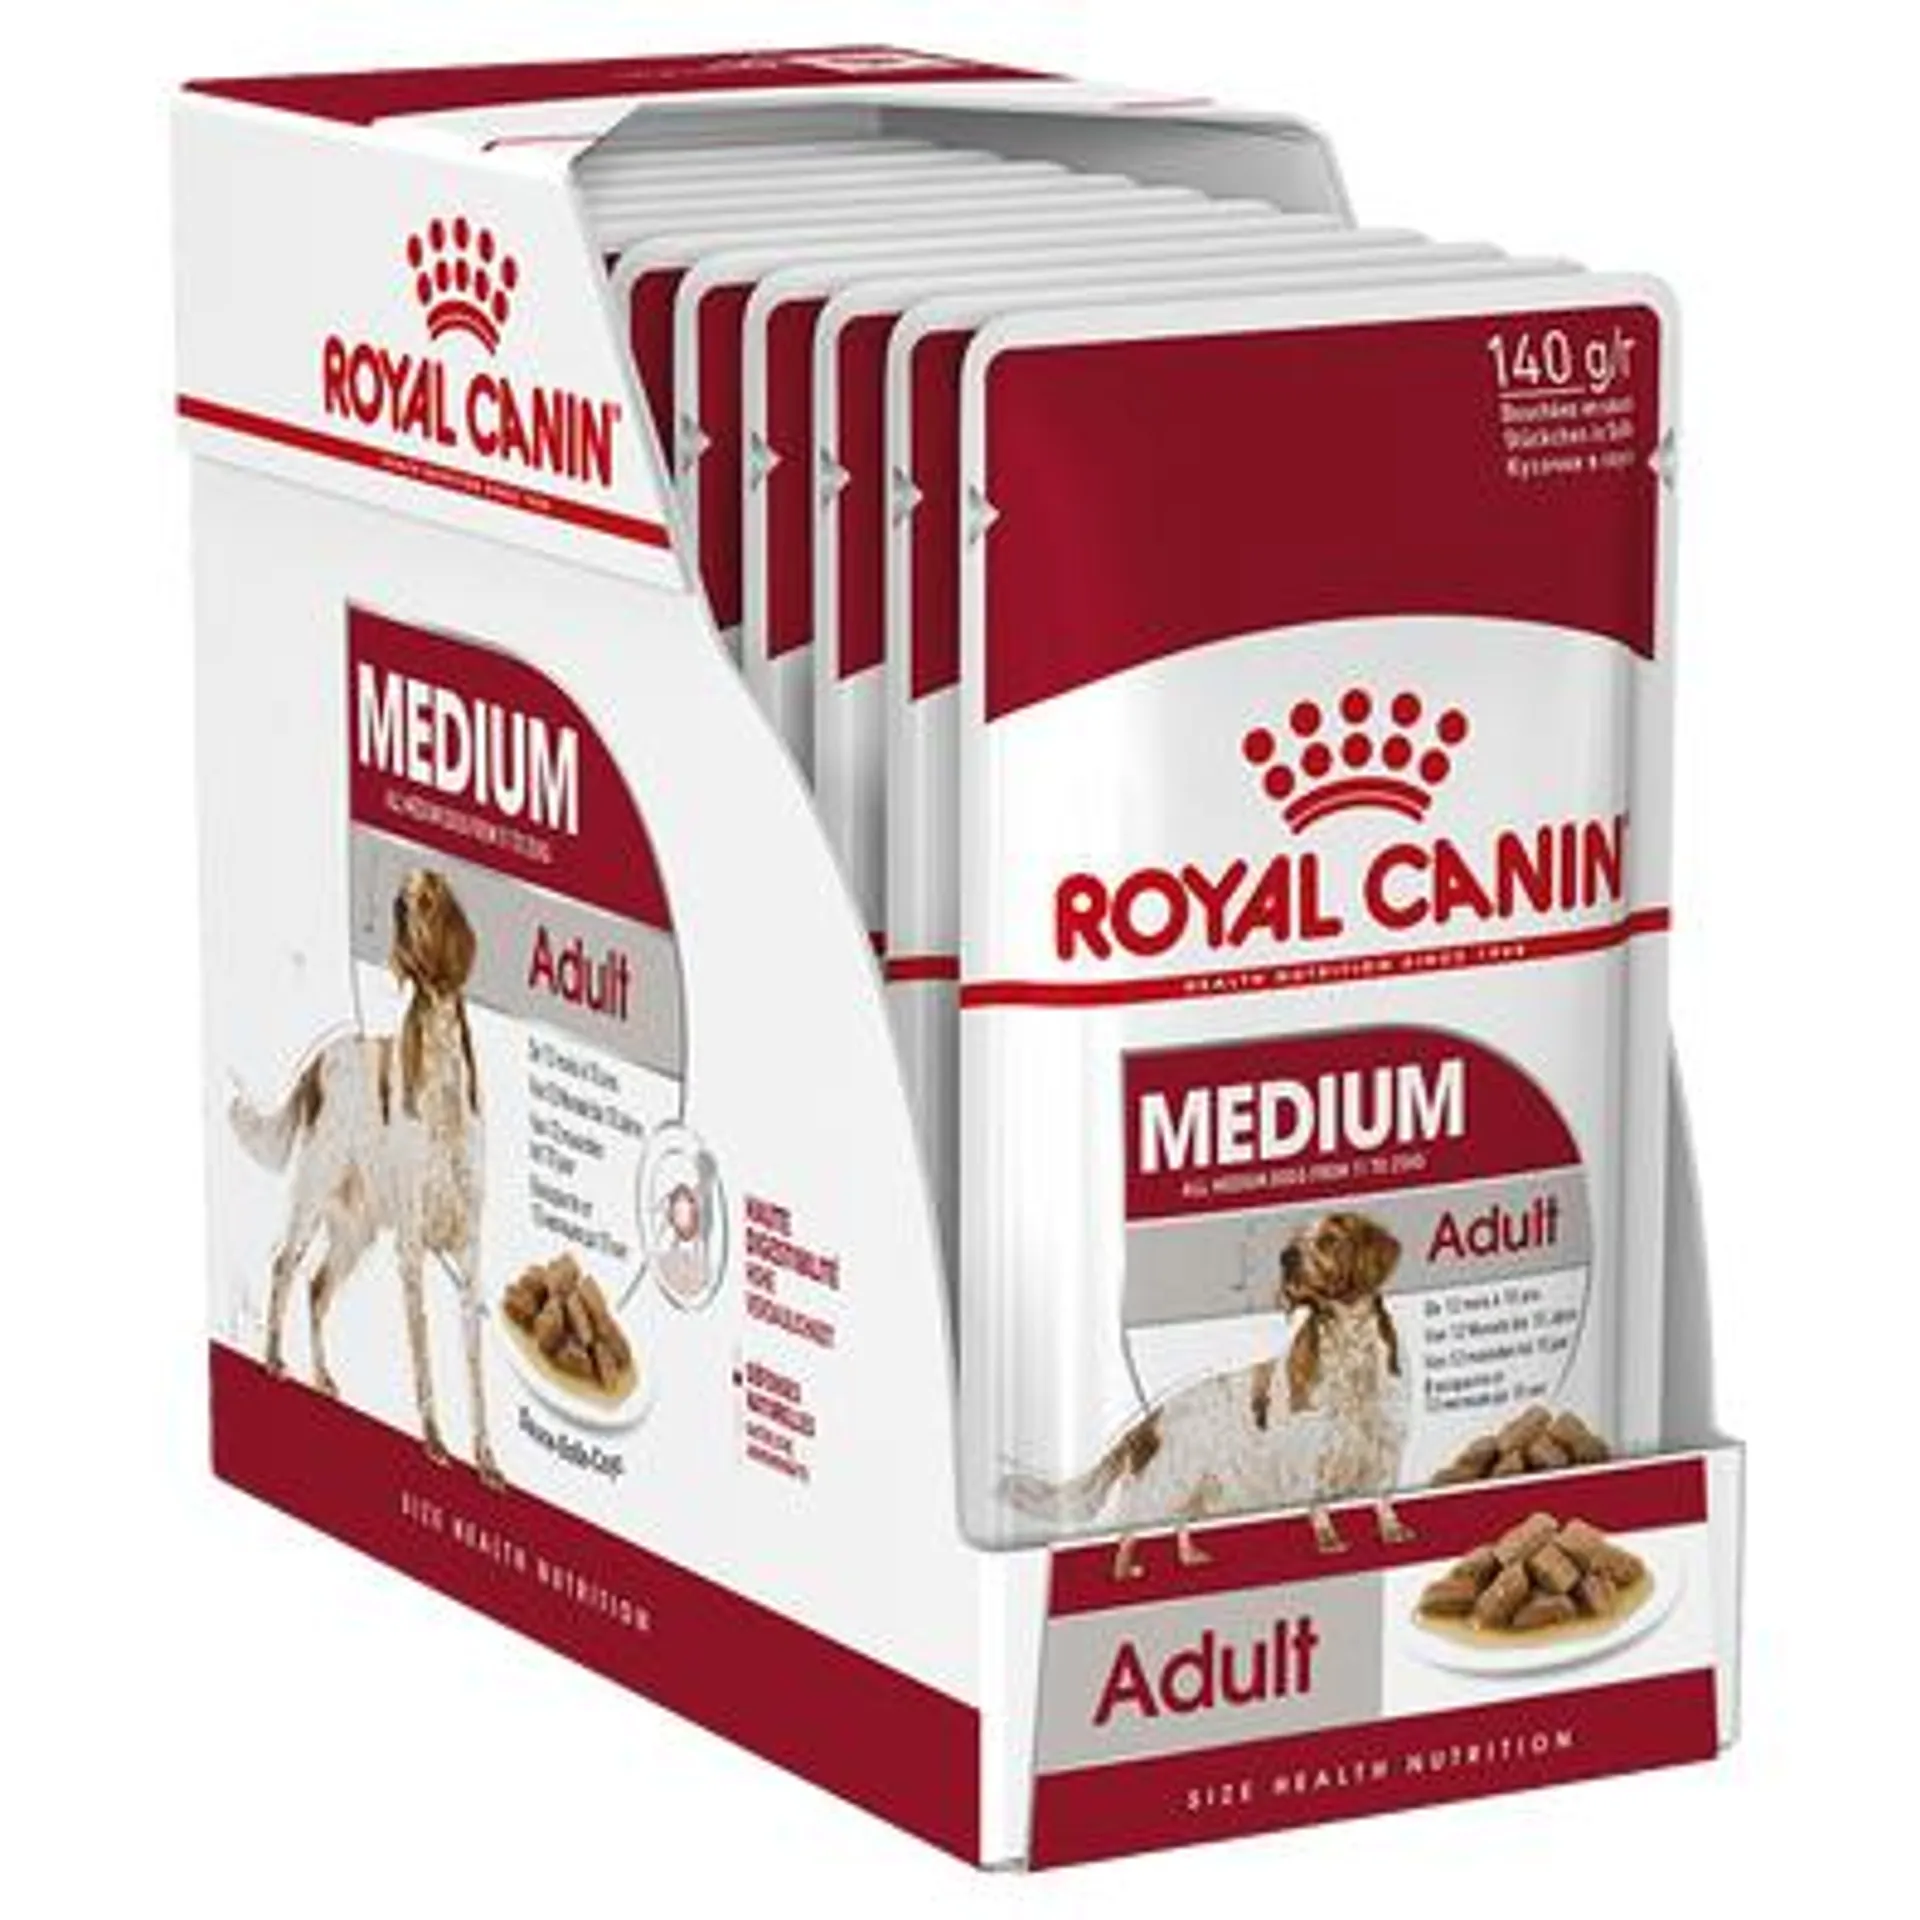 Royal Canin Medium Adult Wet Dog Food Pouches